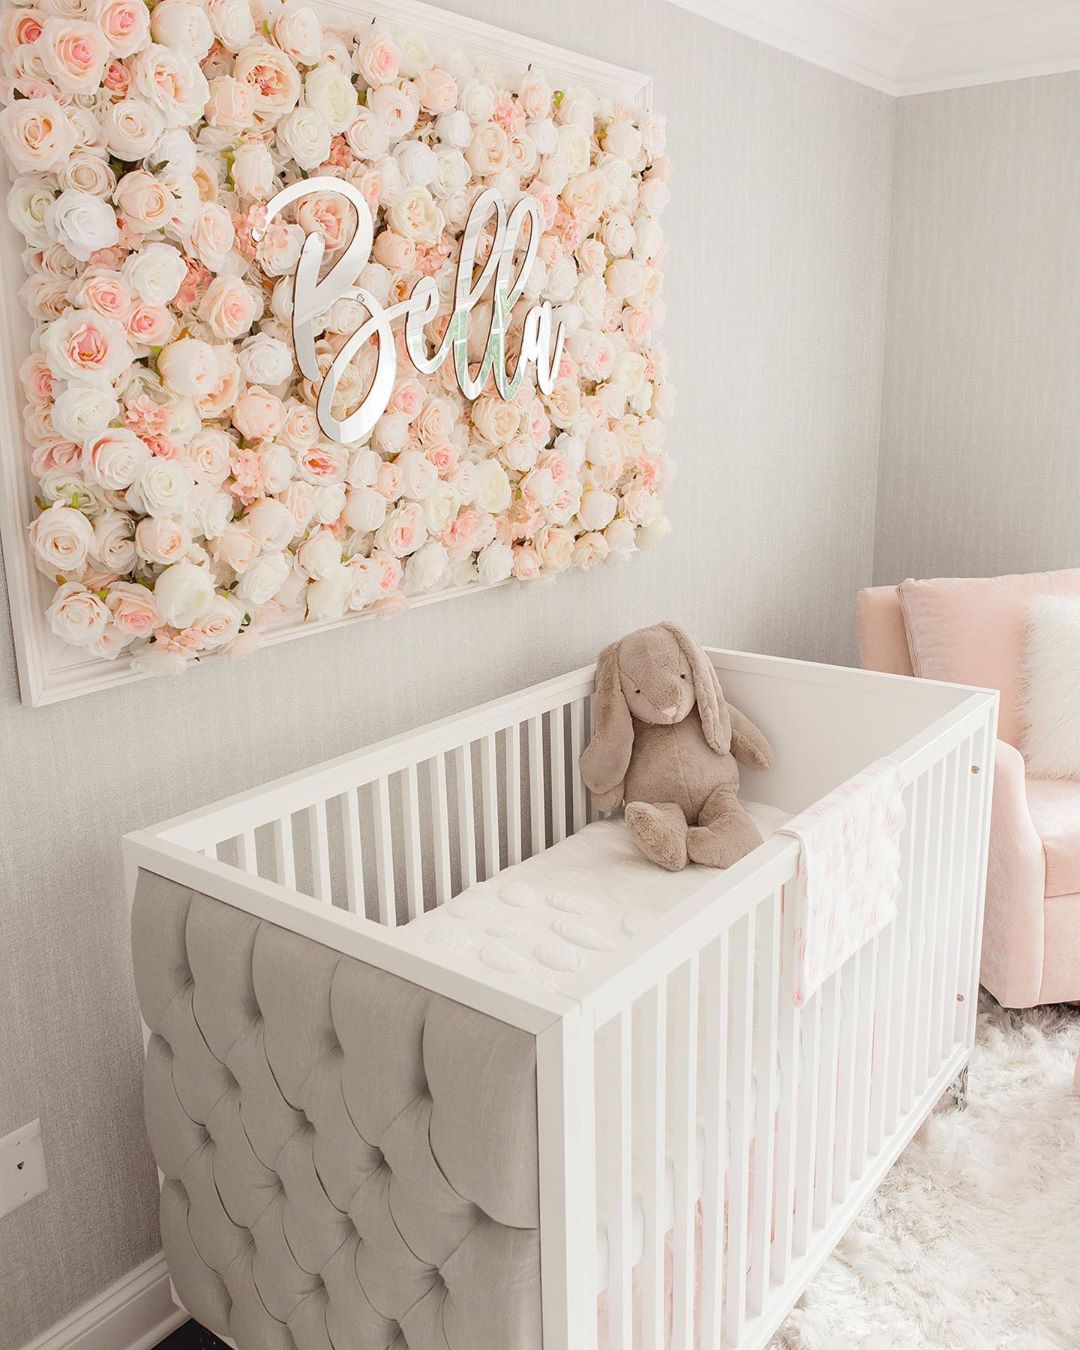 Baby girl nursery with pink decor. Photo by Instagram user @home.inspirationbyme